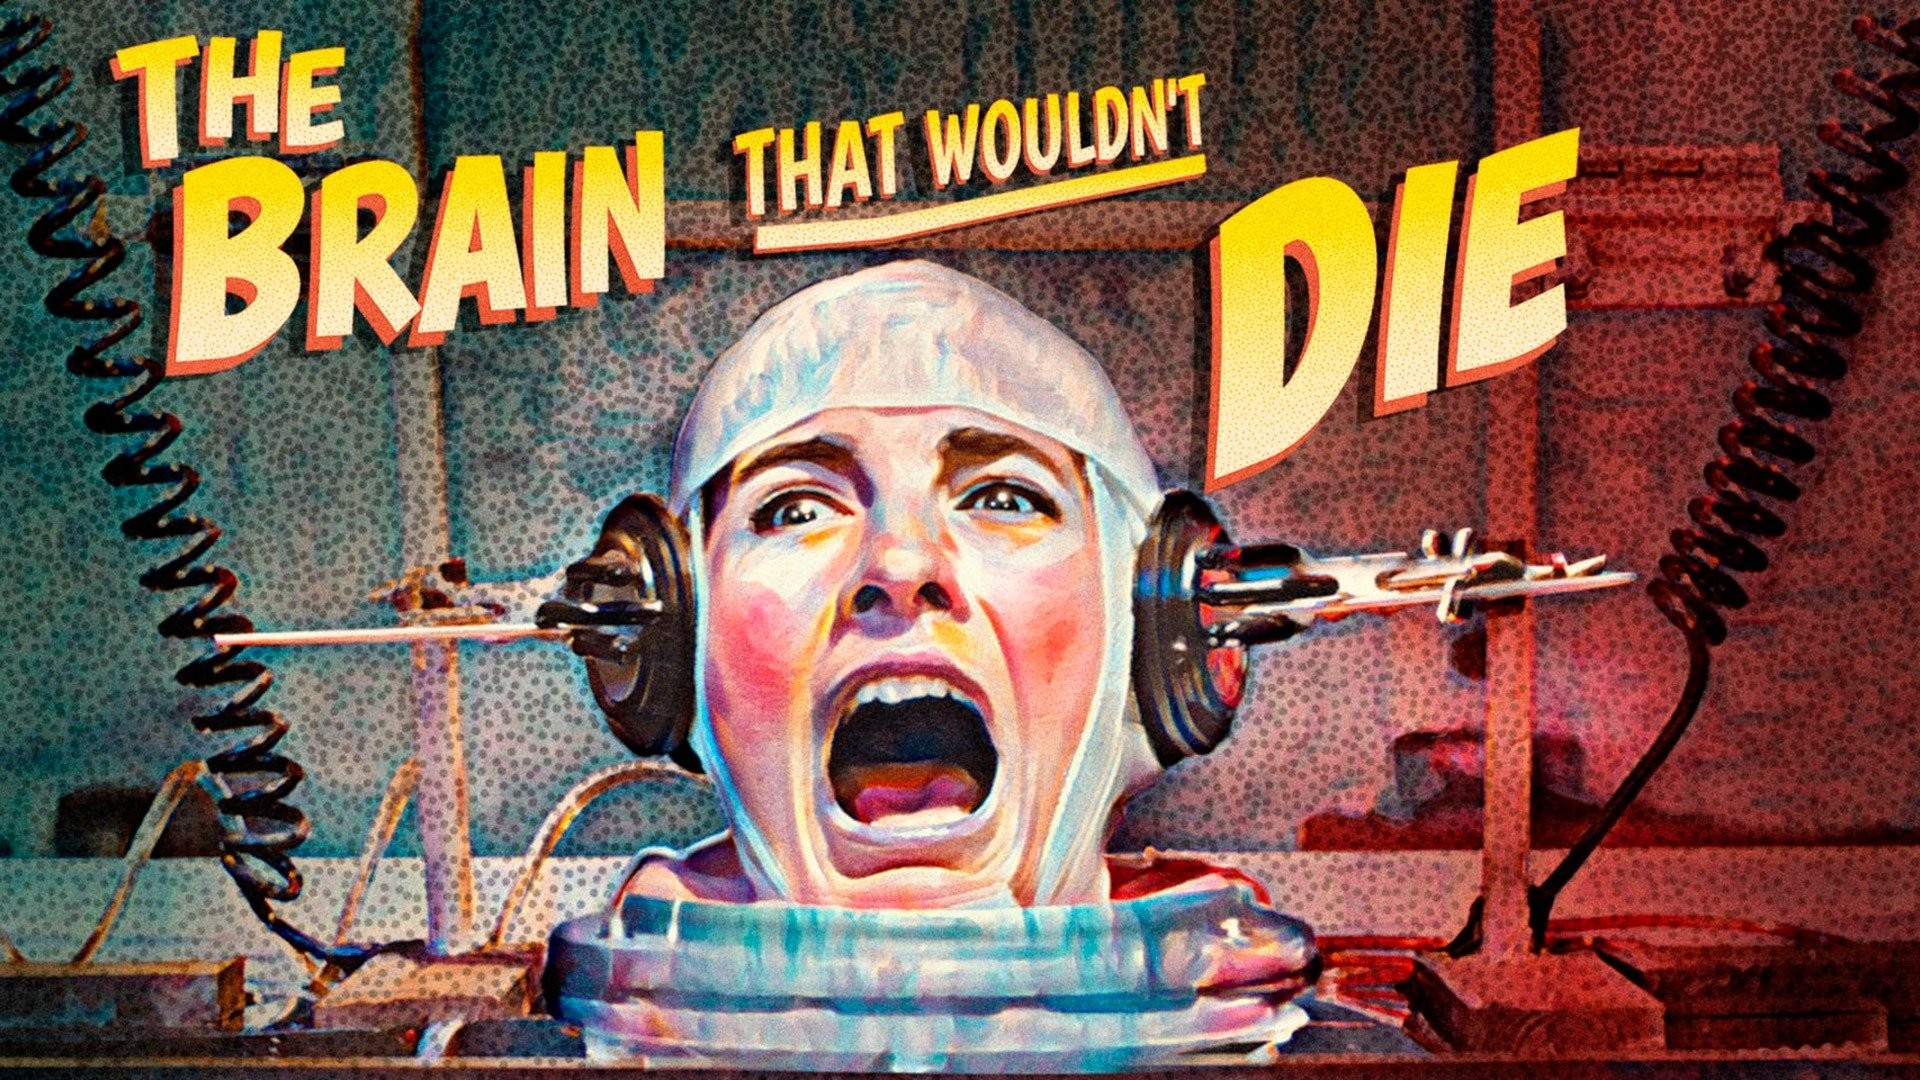 Watch The Brain That Wouldn't Die Movie Online for Free Anytime